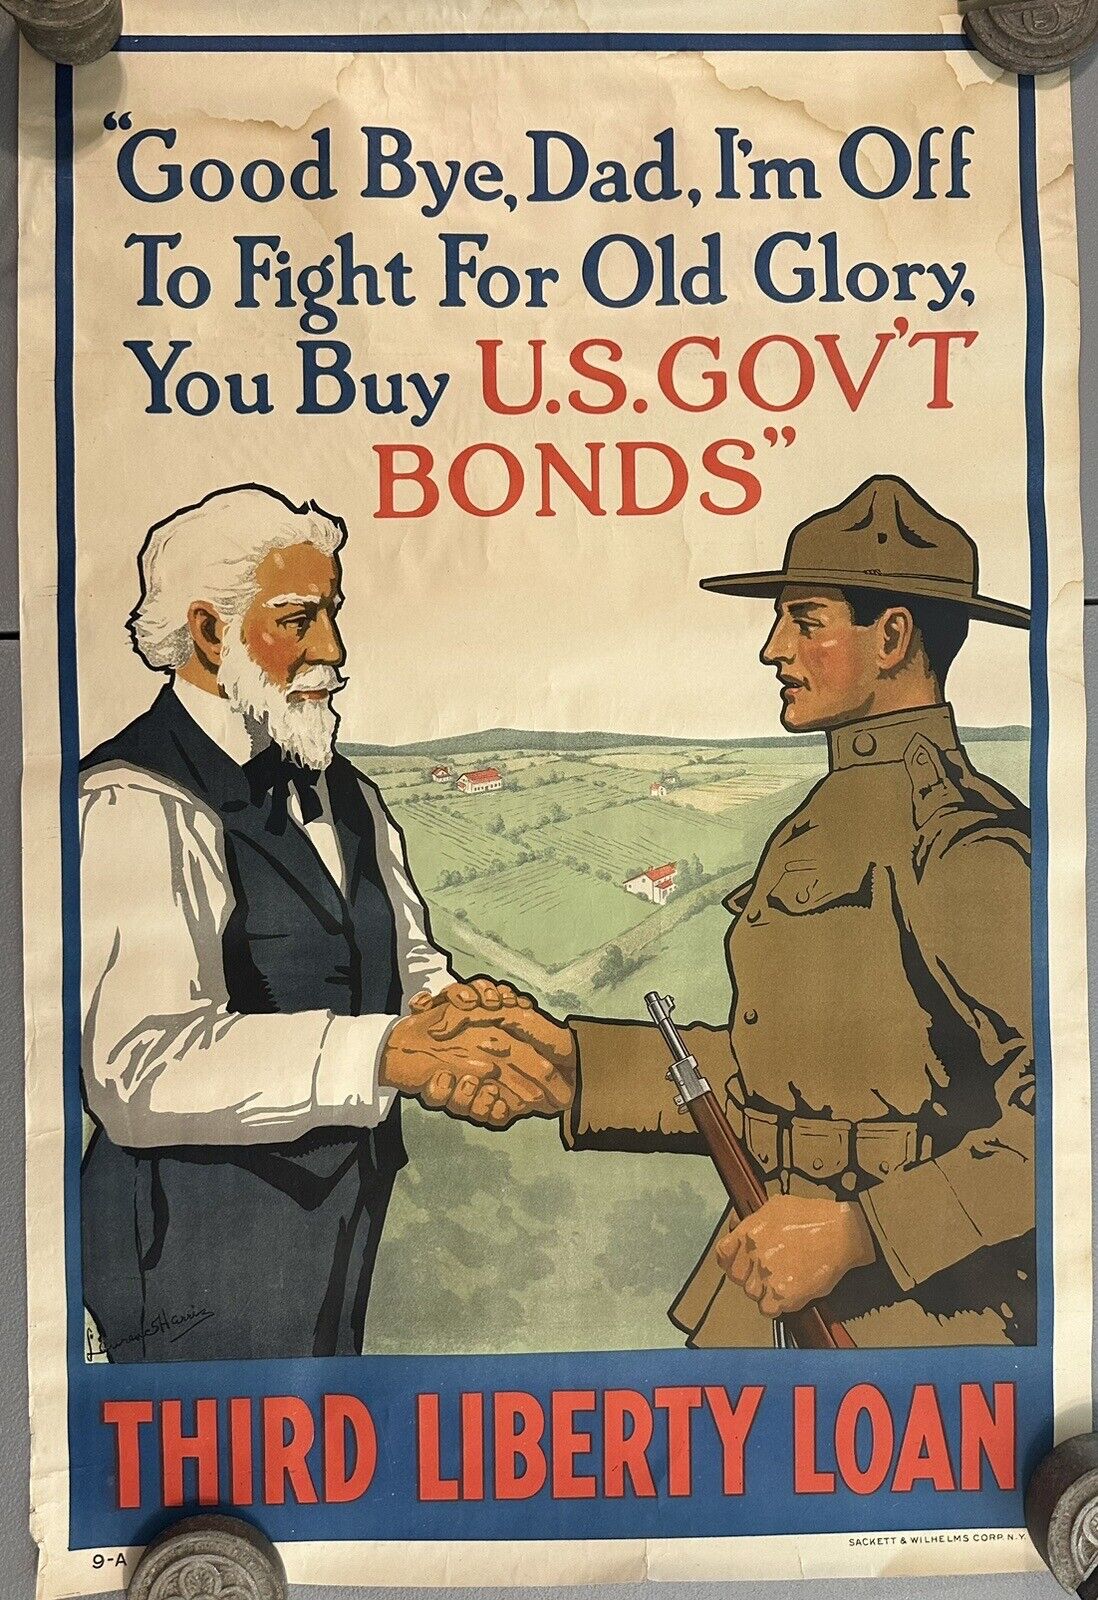 1918 “Good bye, Dad, I'm off to fight for Old Glory” Original WWI Poster